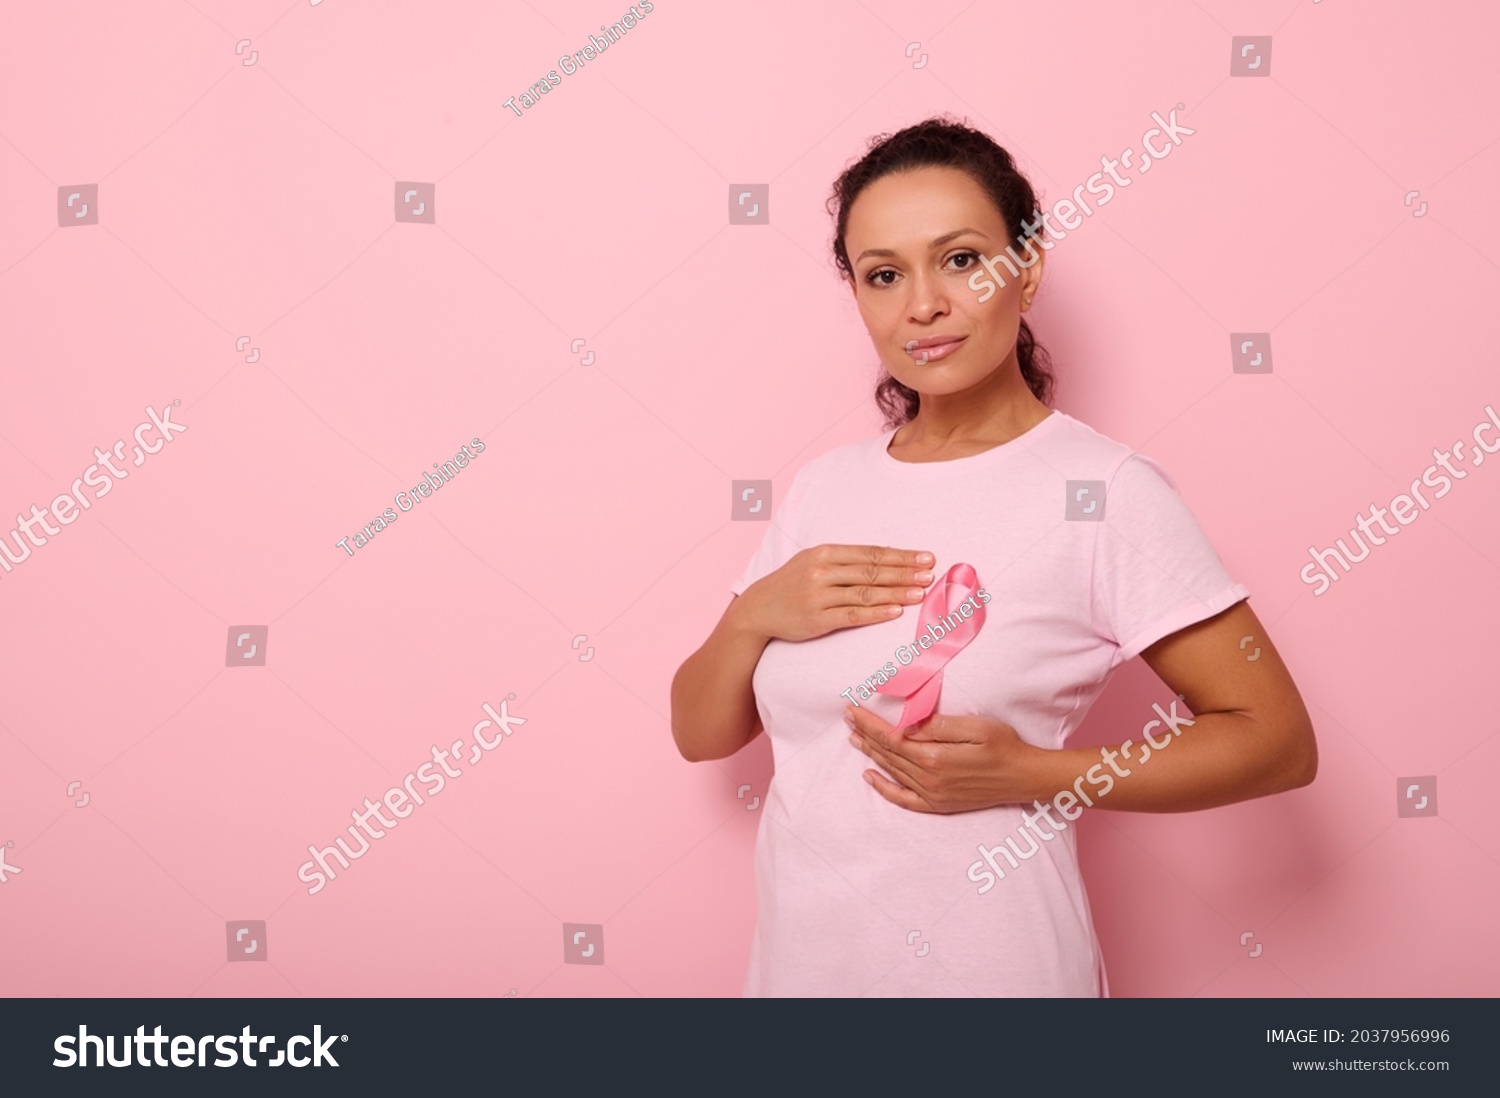 Mixed race woman puts hands around pink ribbon on her pink T Shirt, for breast cancer campaign, supporting Breast Cancer Awareness. Concept of 1 st October Pink Month and women's health care #2037956996